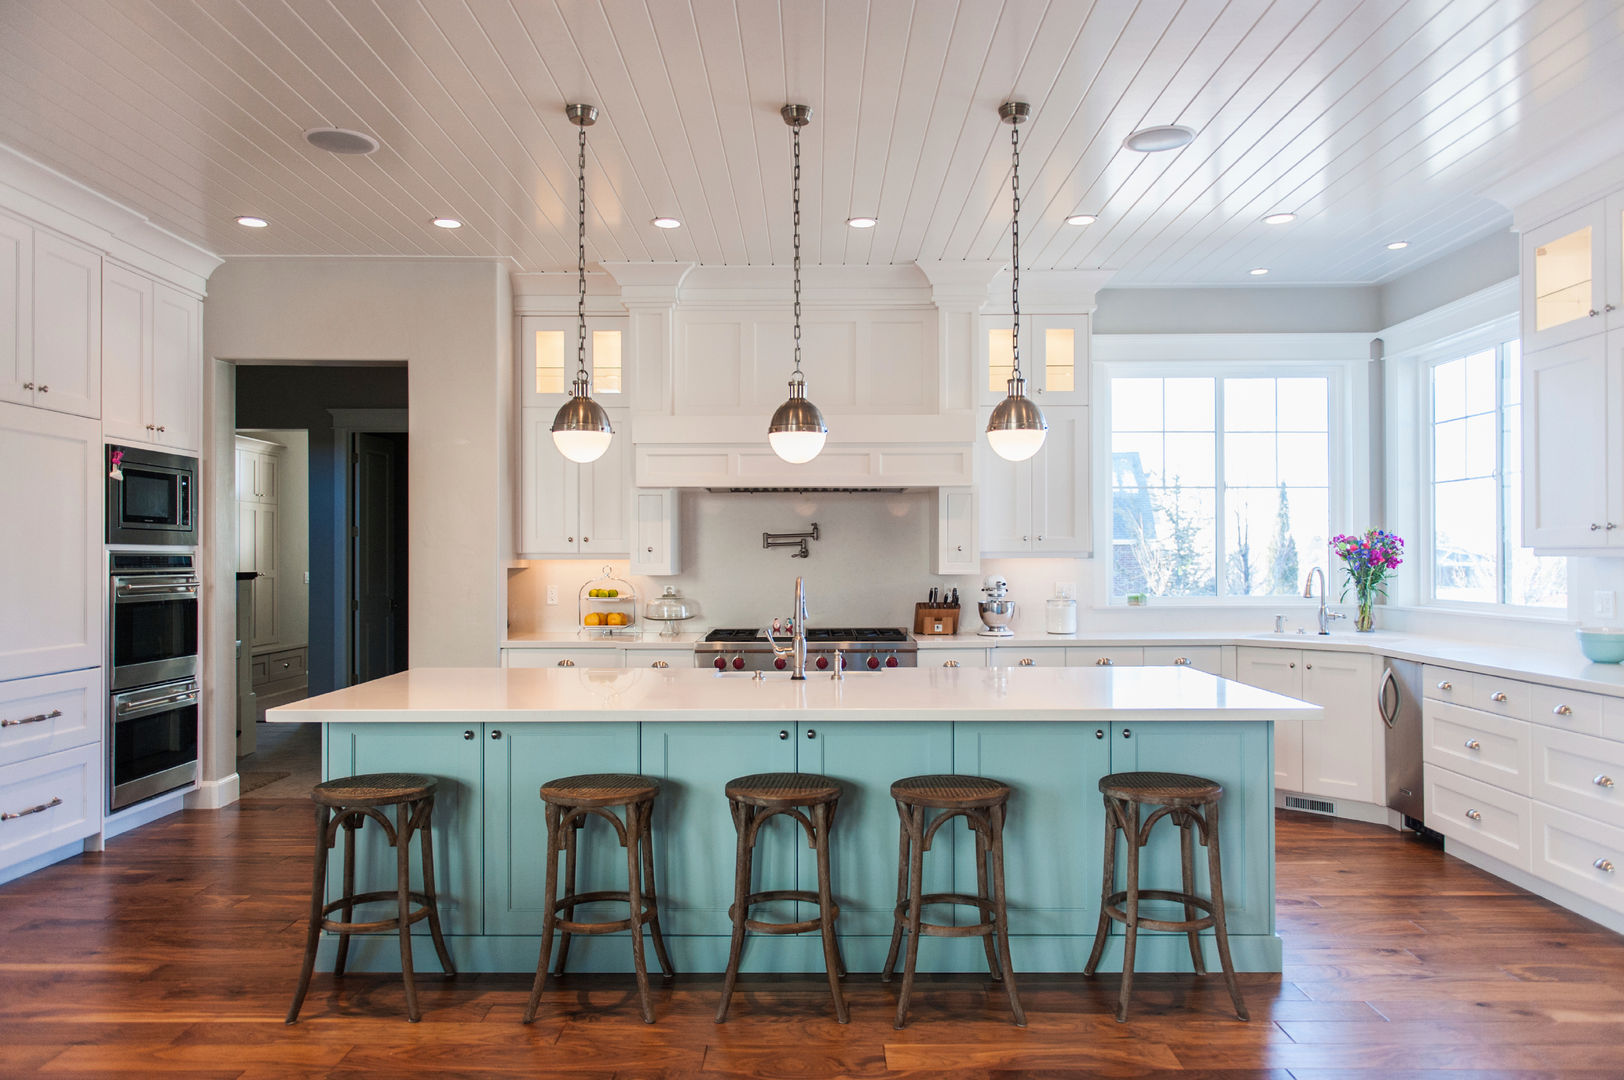 Modern Country-Style Kitchen Gracious Luxury Interiors Cocinas rurales Country,Kitchen,Kitchen Island,Pastel,Blue,Barn,Barn Conversion